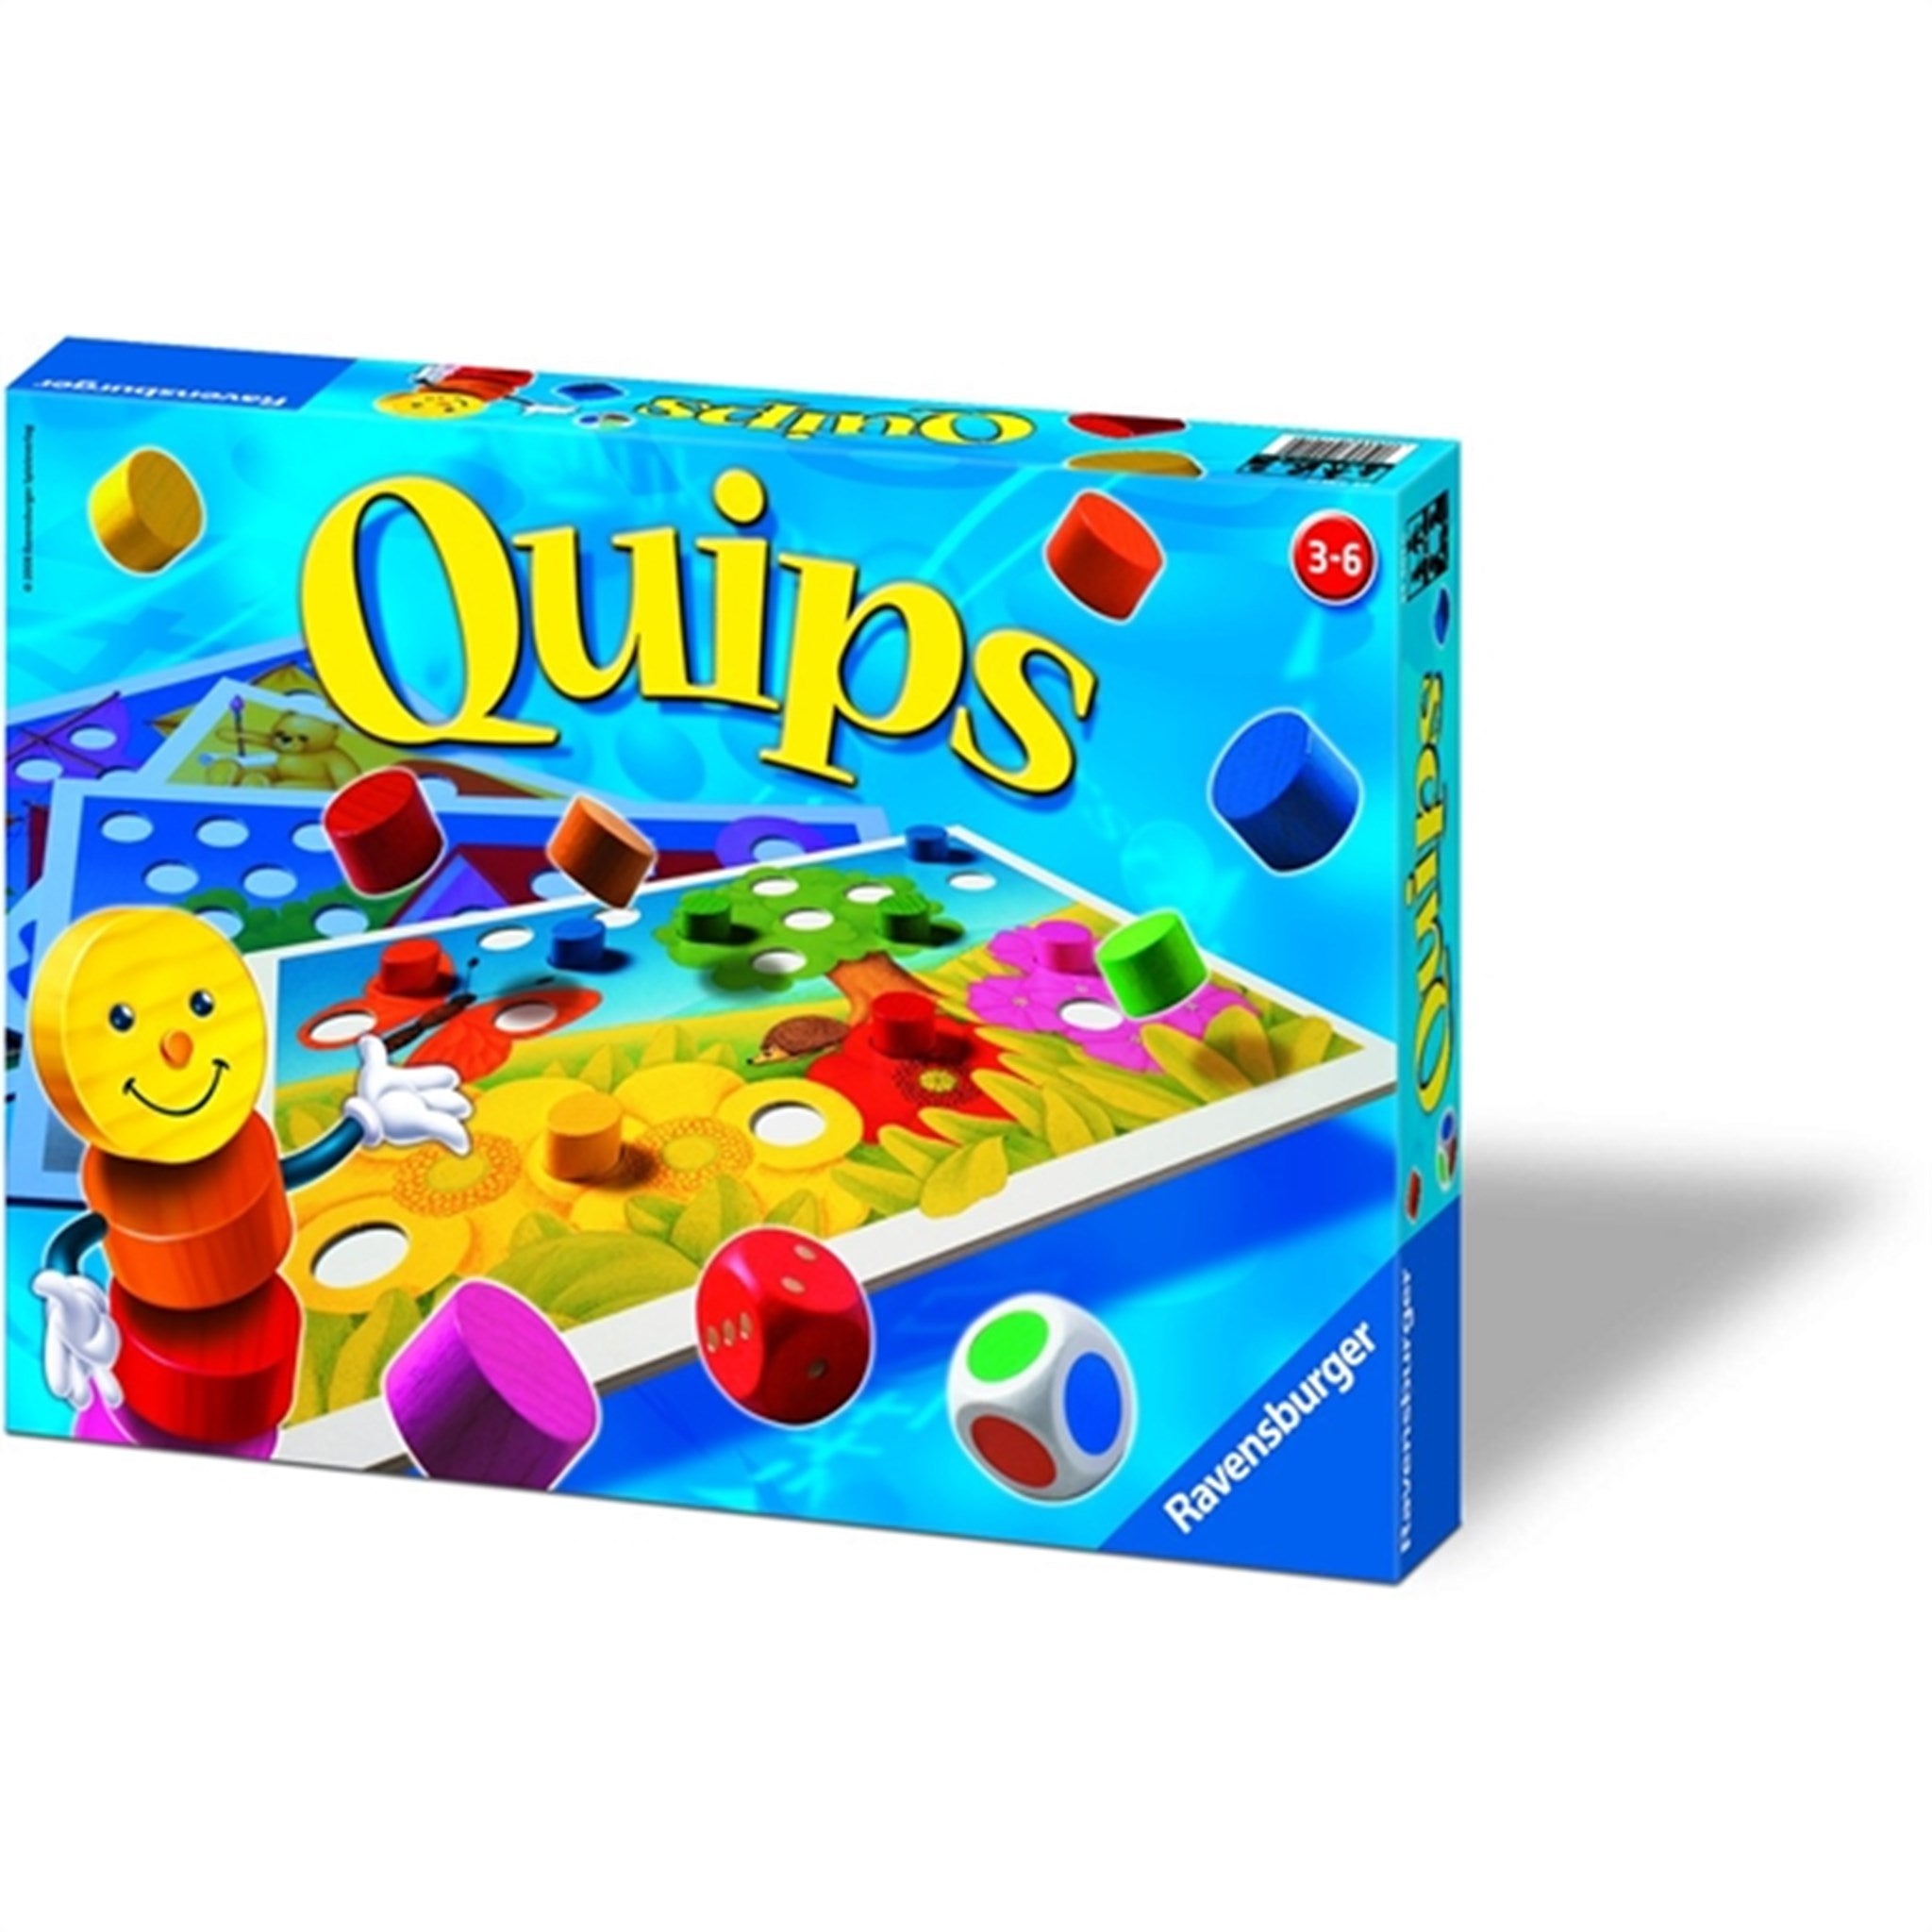 Ravensburger Quips Board Game